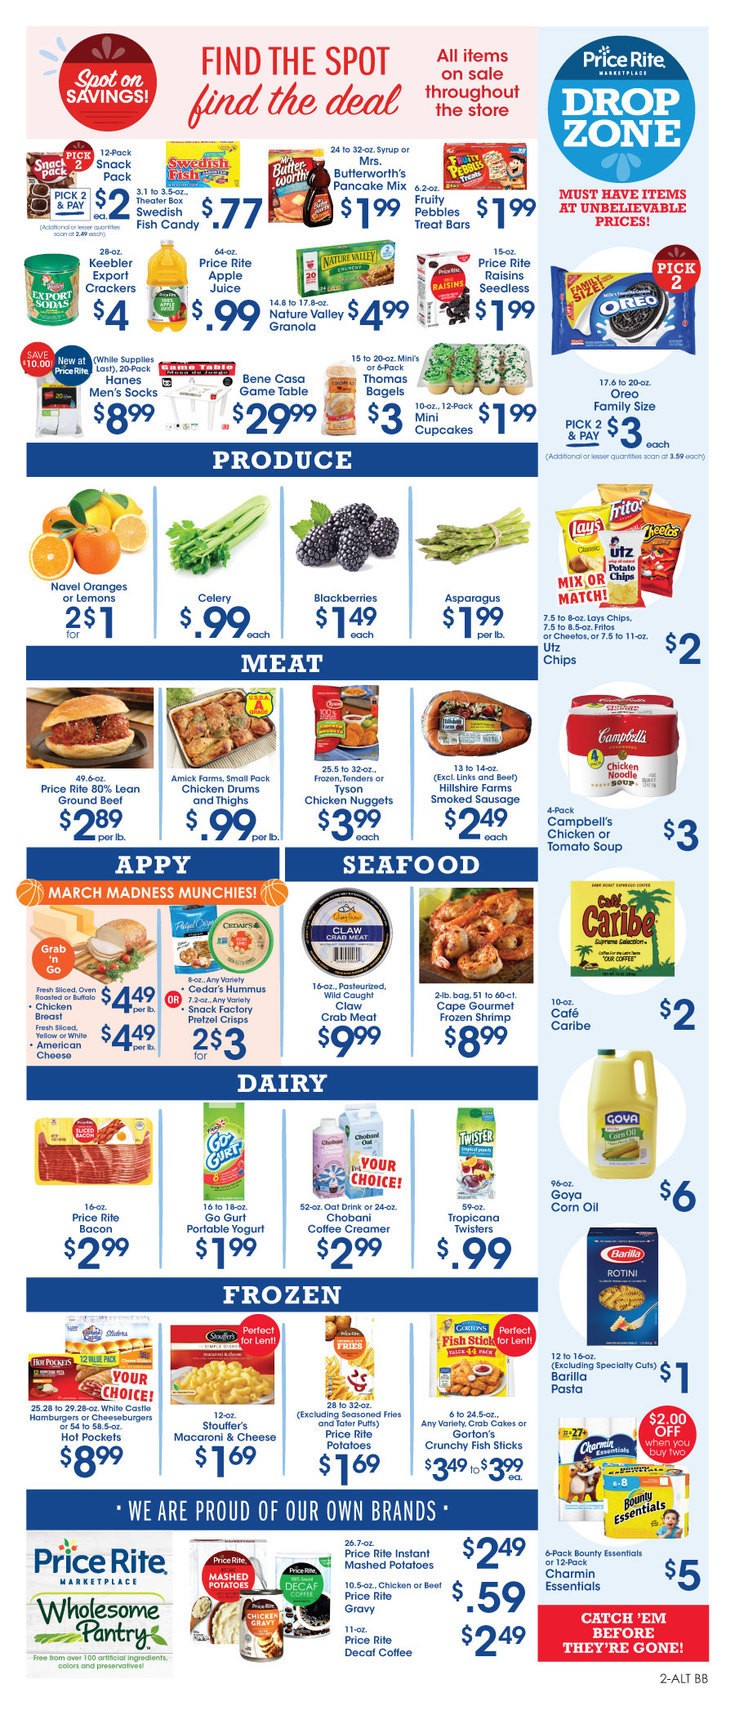 Price Rite Weekly Ad from March 6